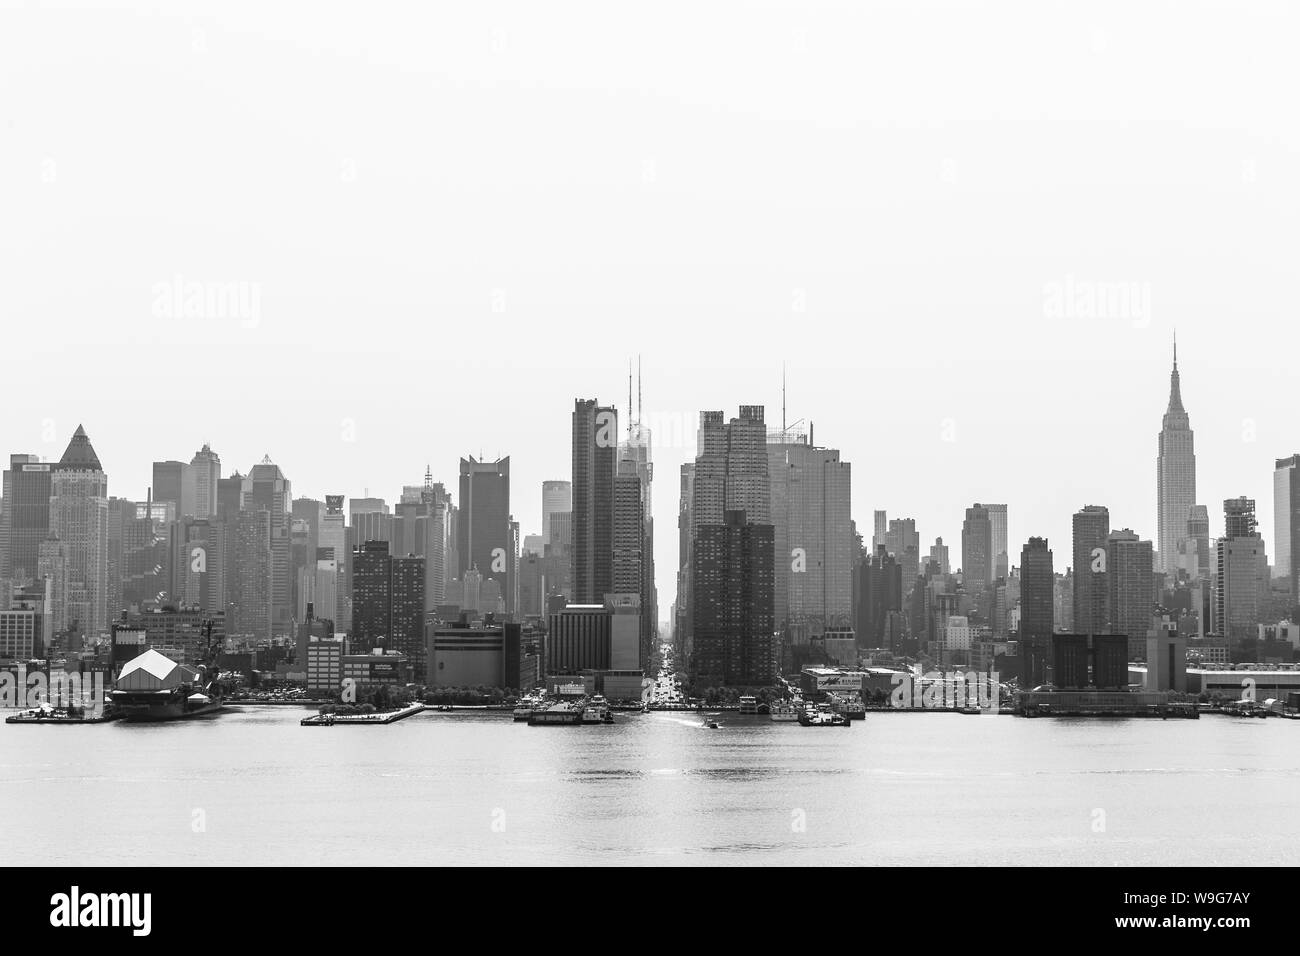 New York City midtown Manhattan skyline panorama view from Boulevard East Old Glory Park over Hudson River on a misty morning. Black and white image. Stock Photo